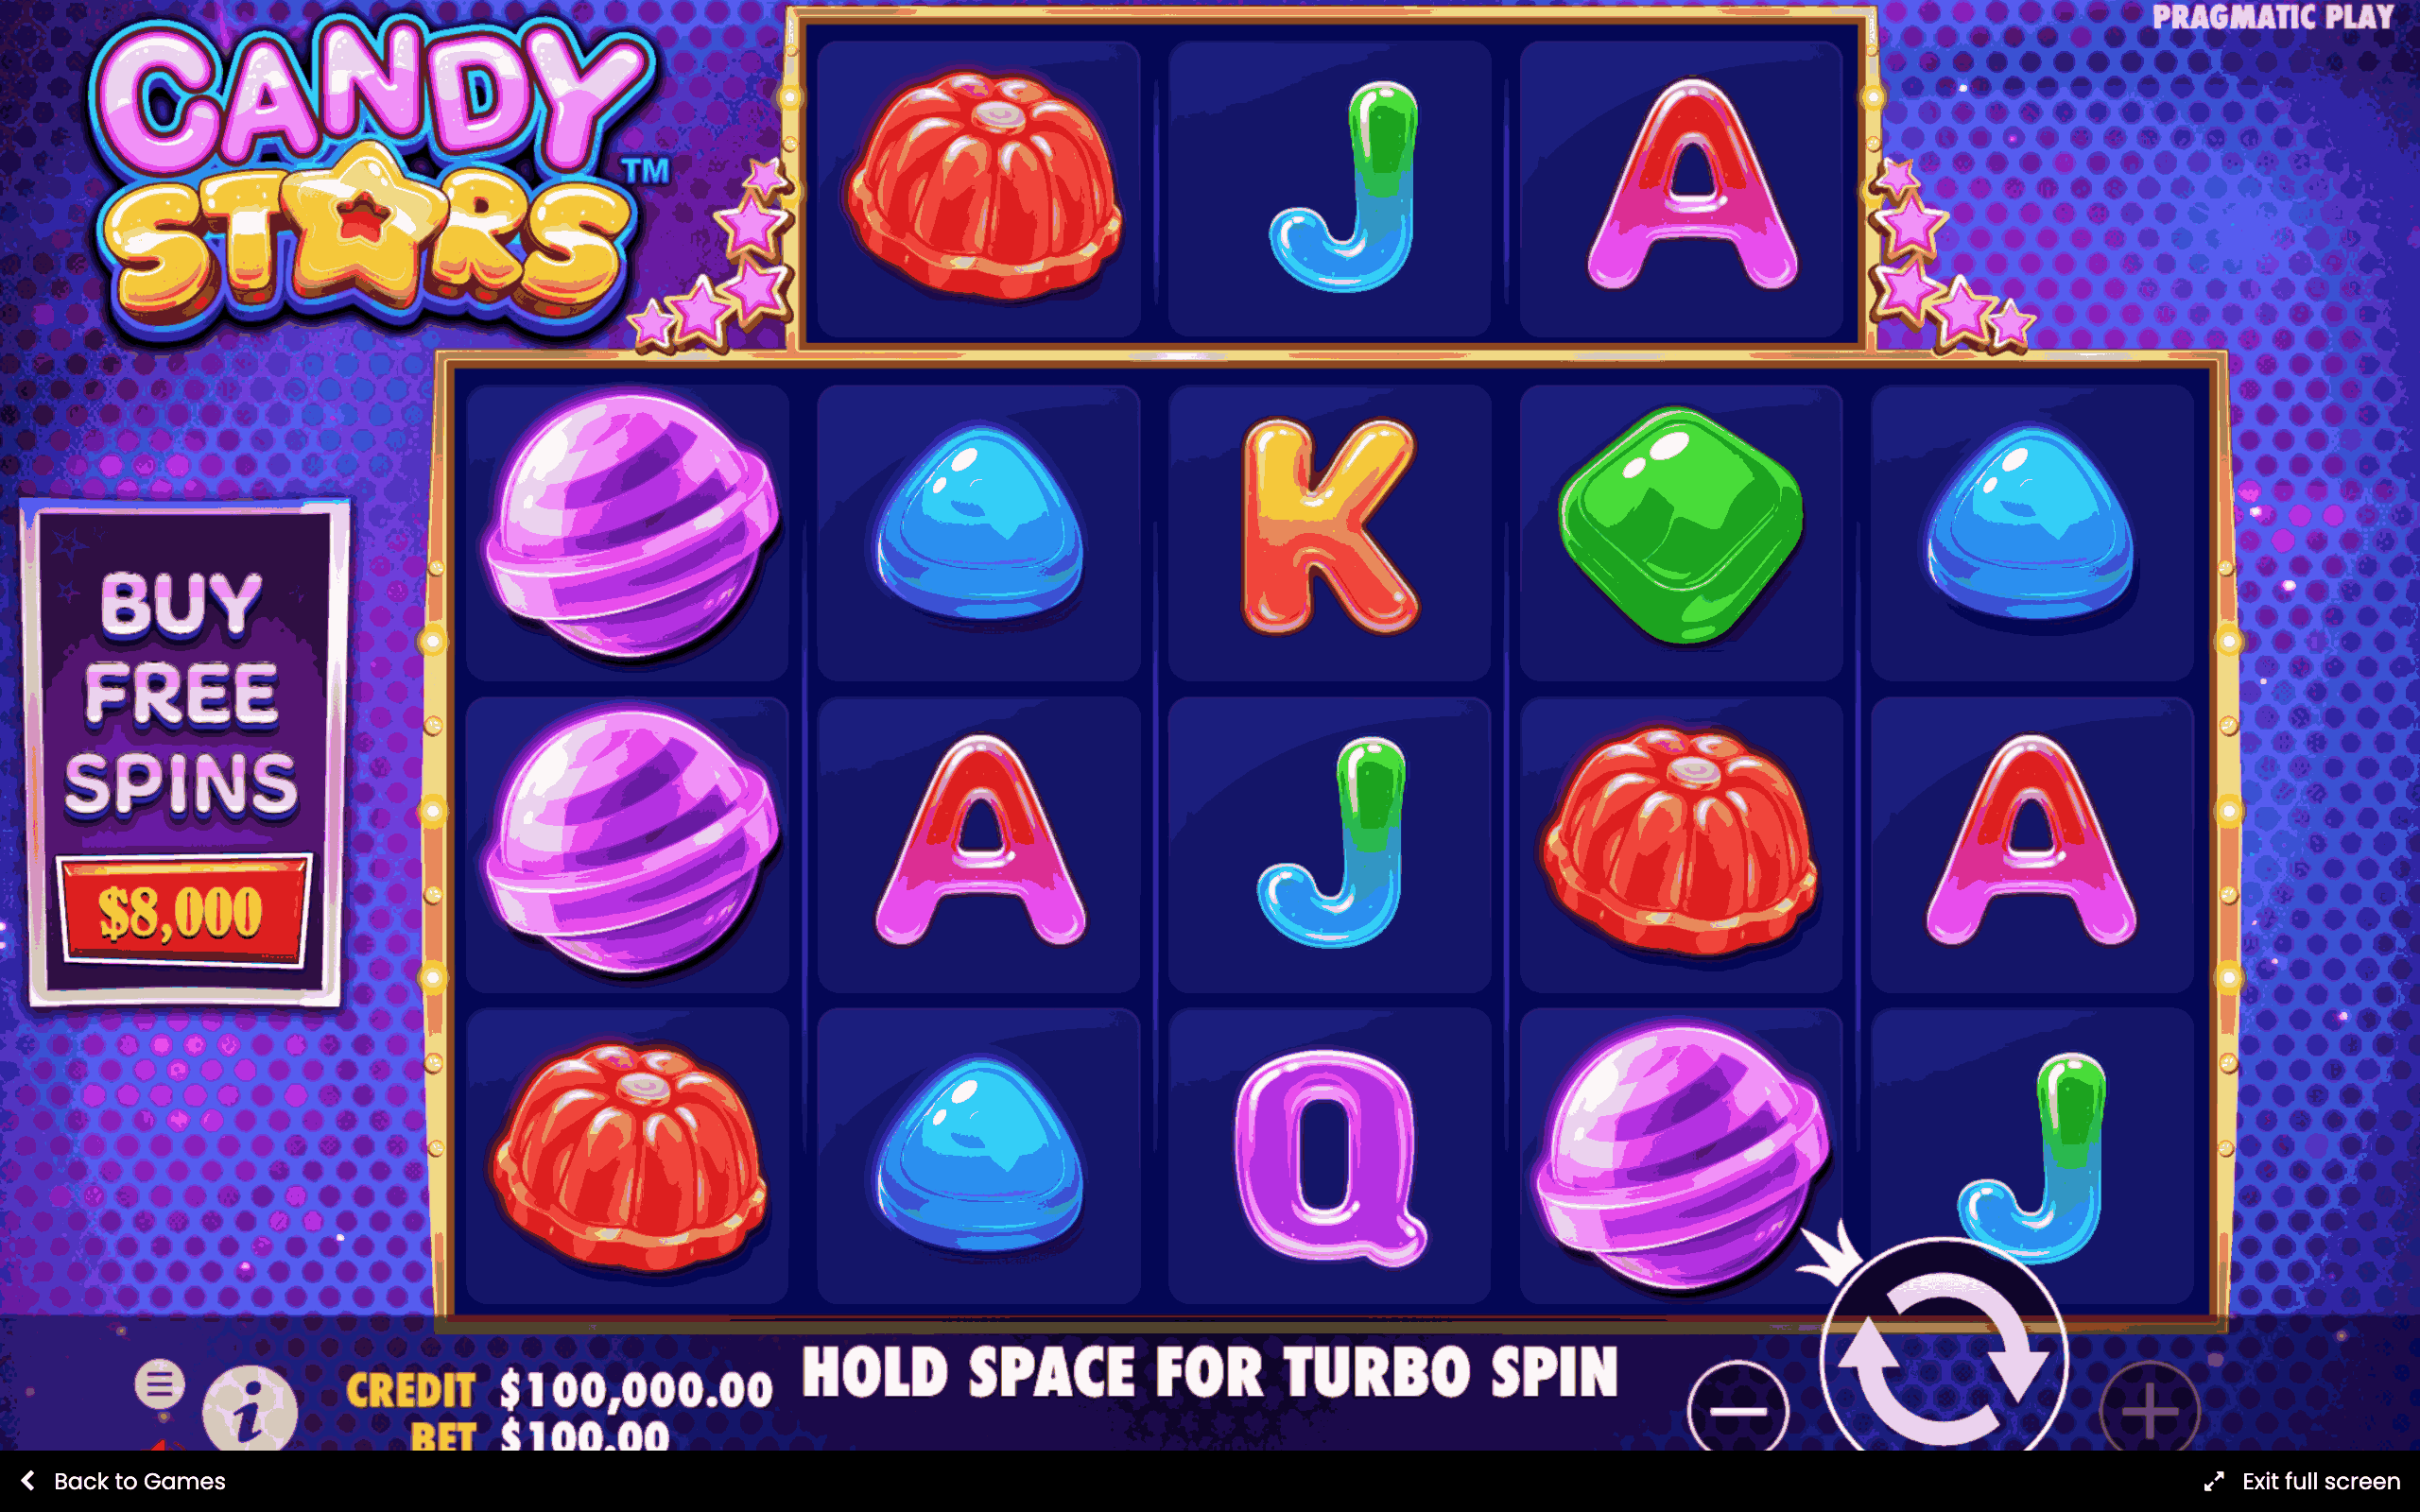 Candy Stars Slot Review - 5